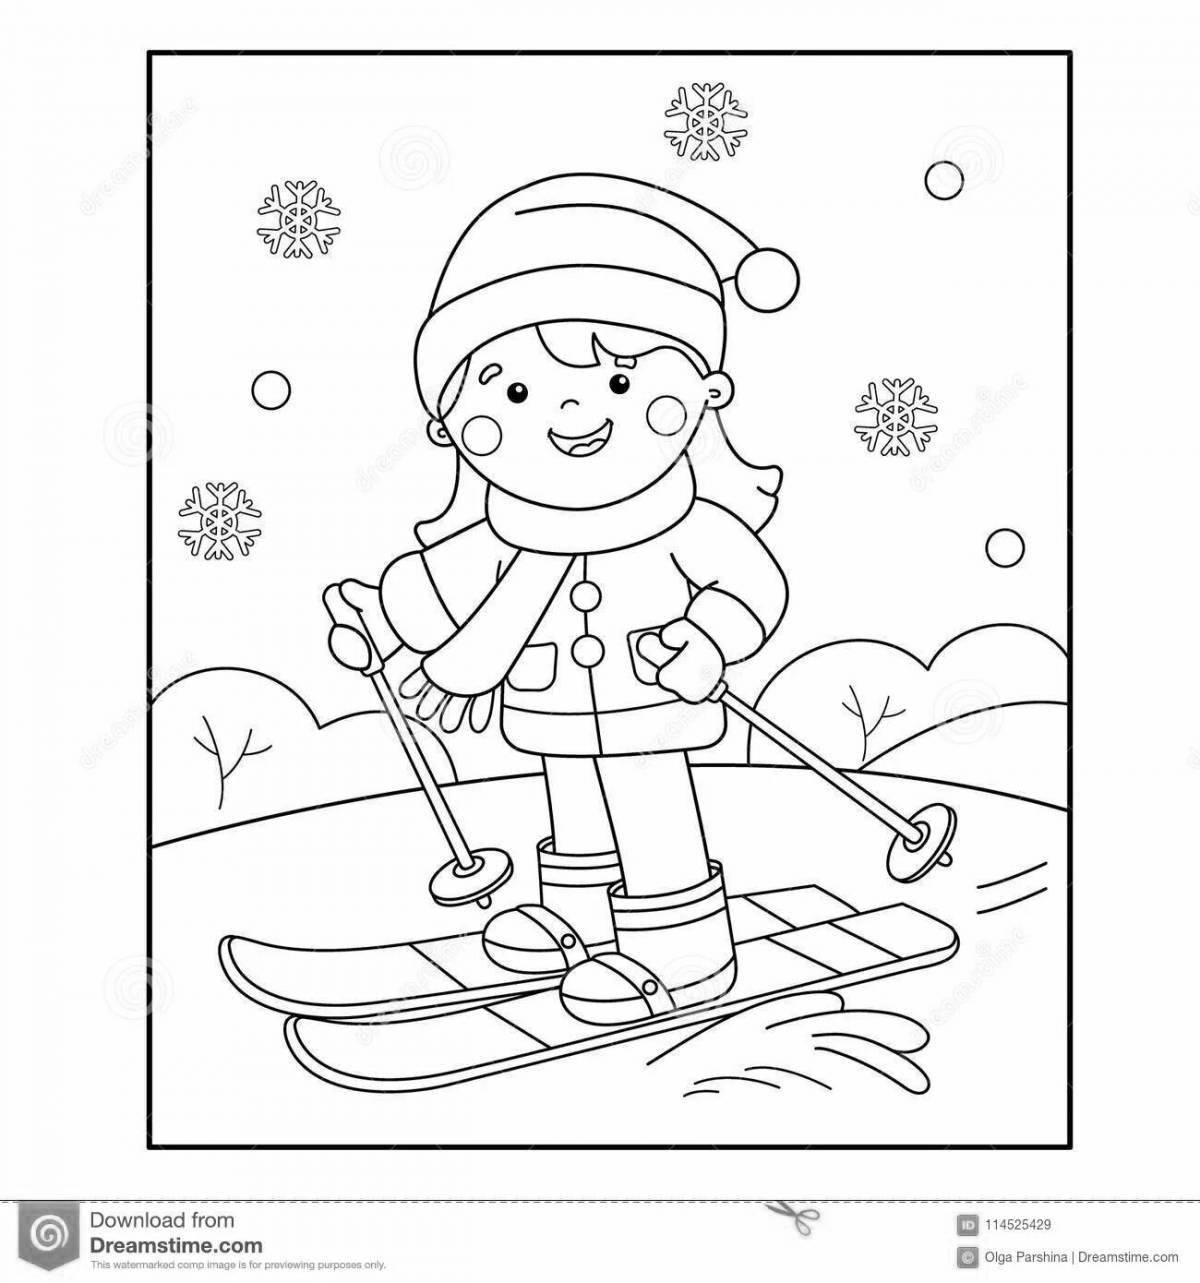 Colourful coloring winter fun junior group